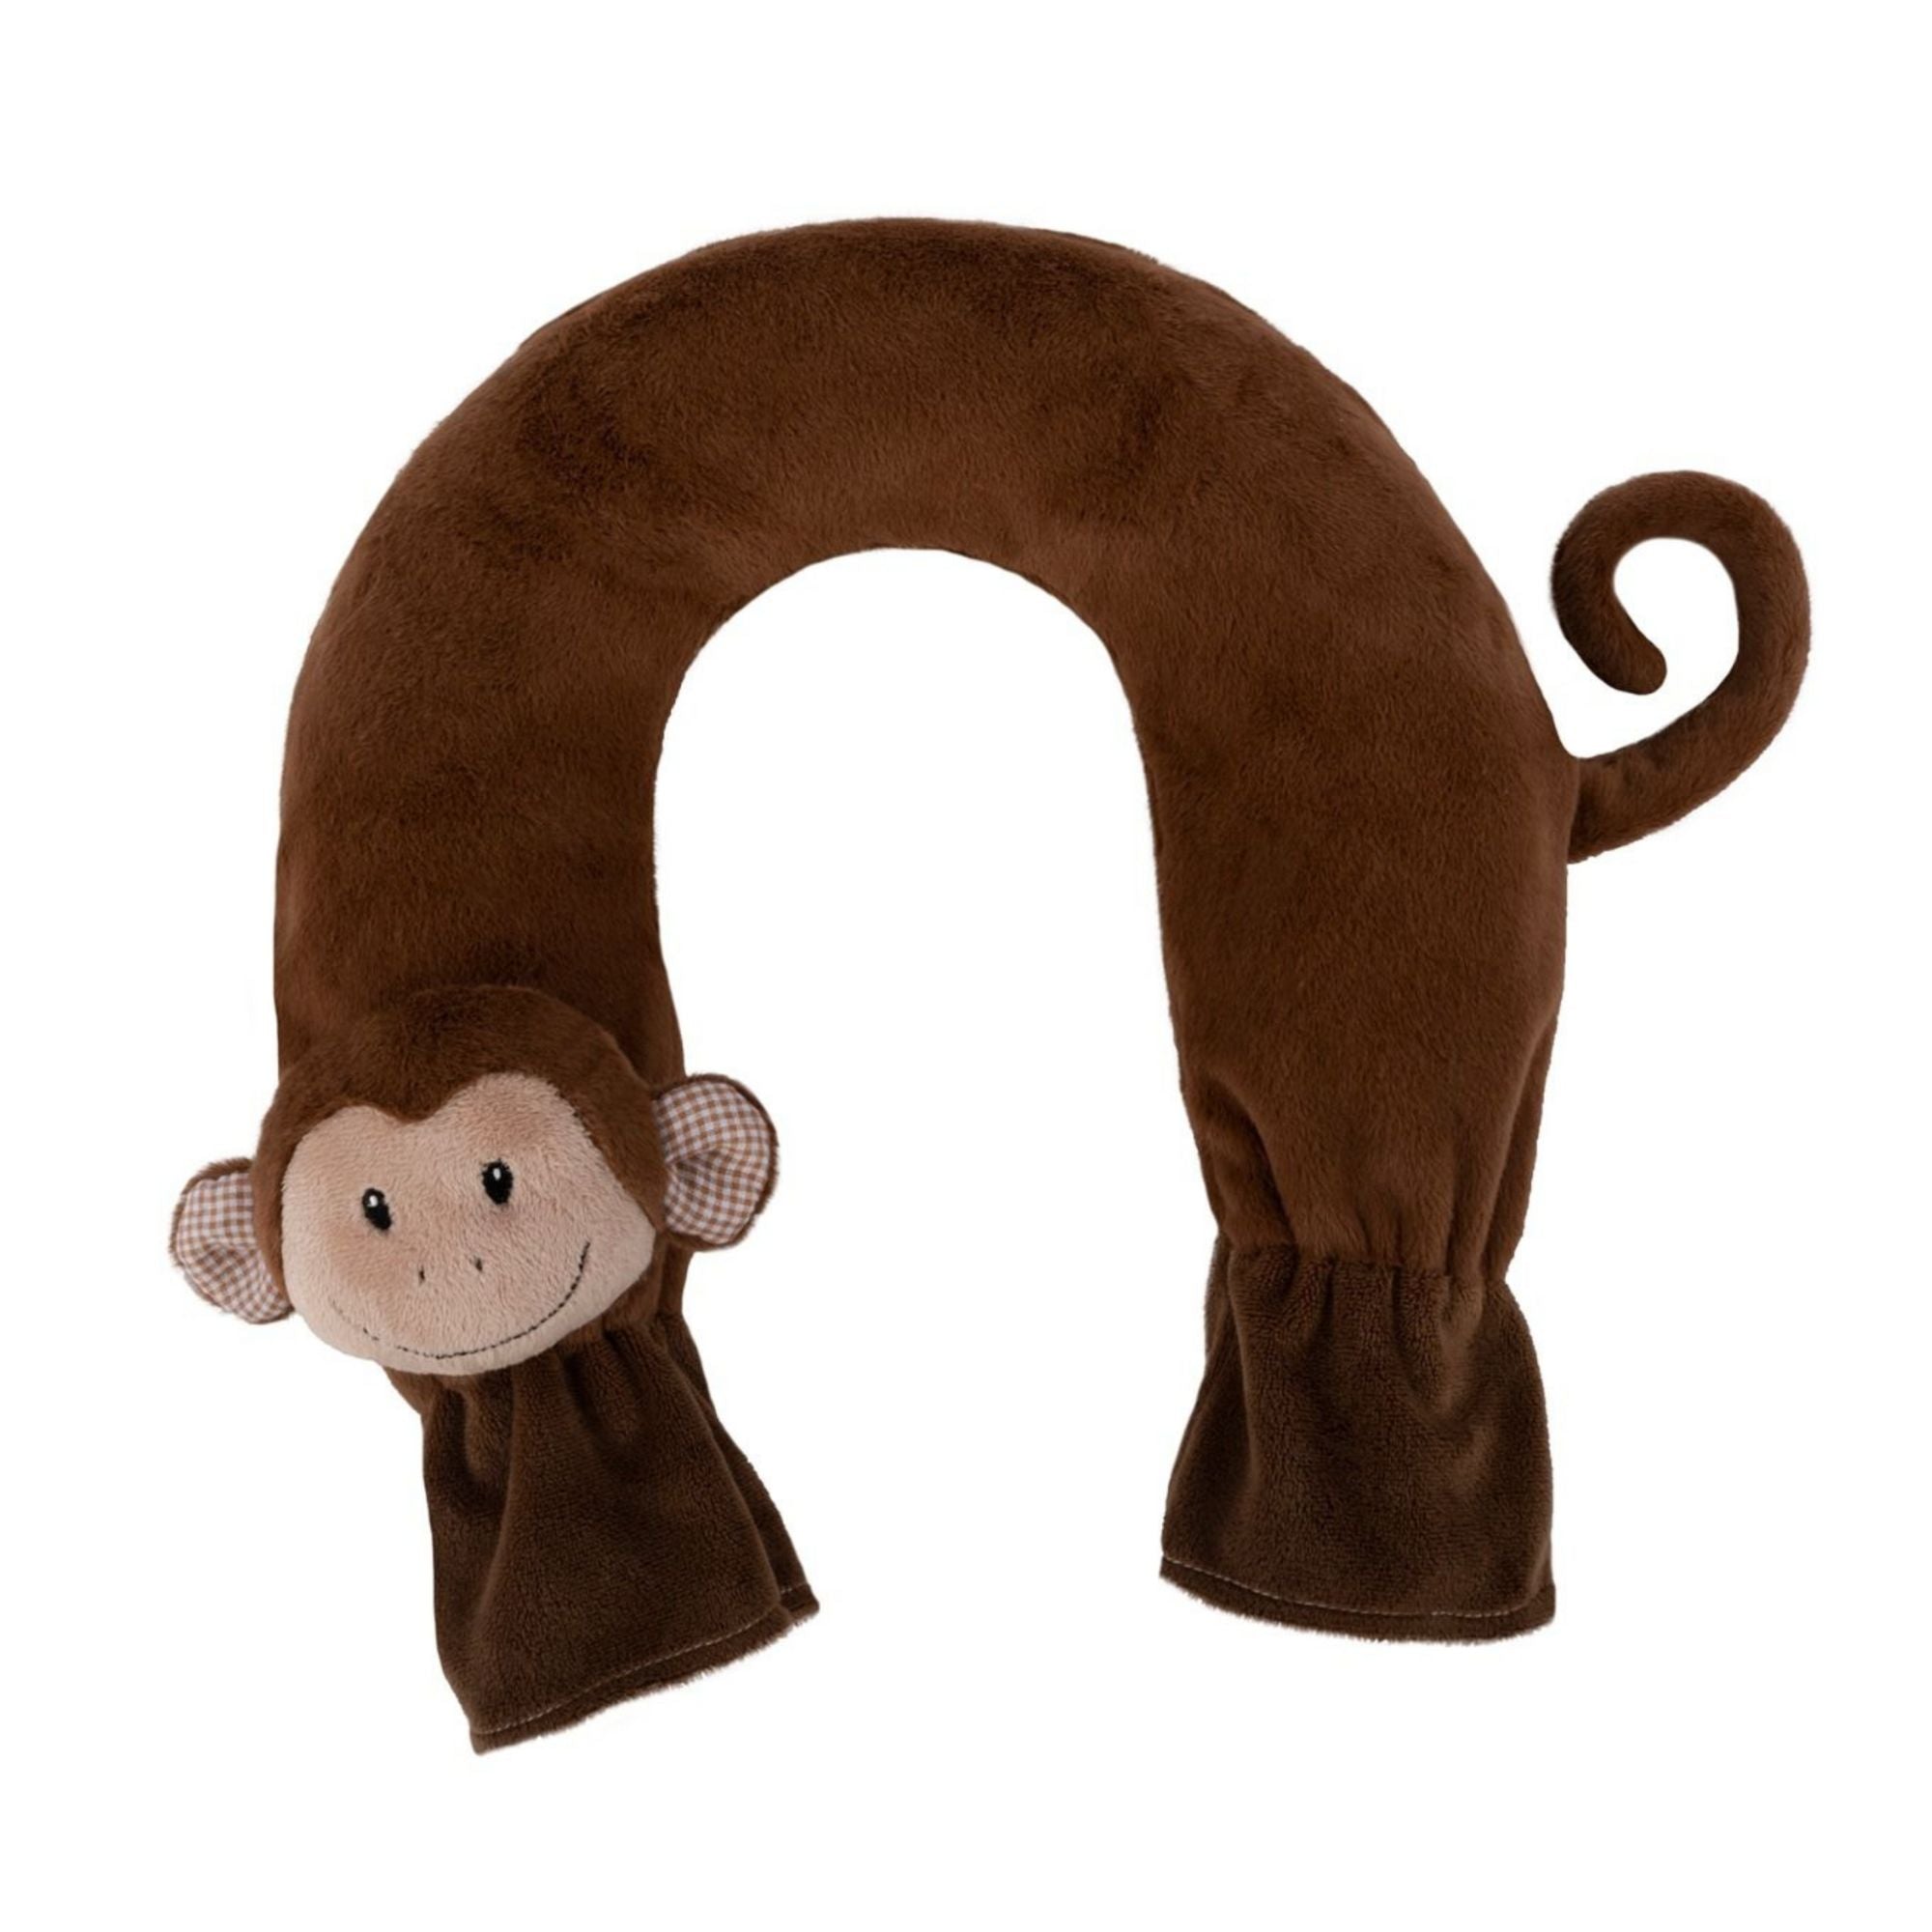 Neck Hot Water Bottle with Brown Monkey Fleece Cover